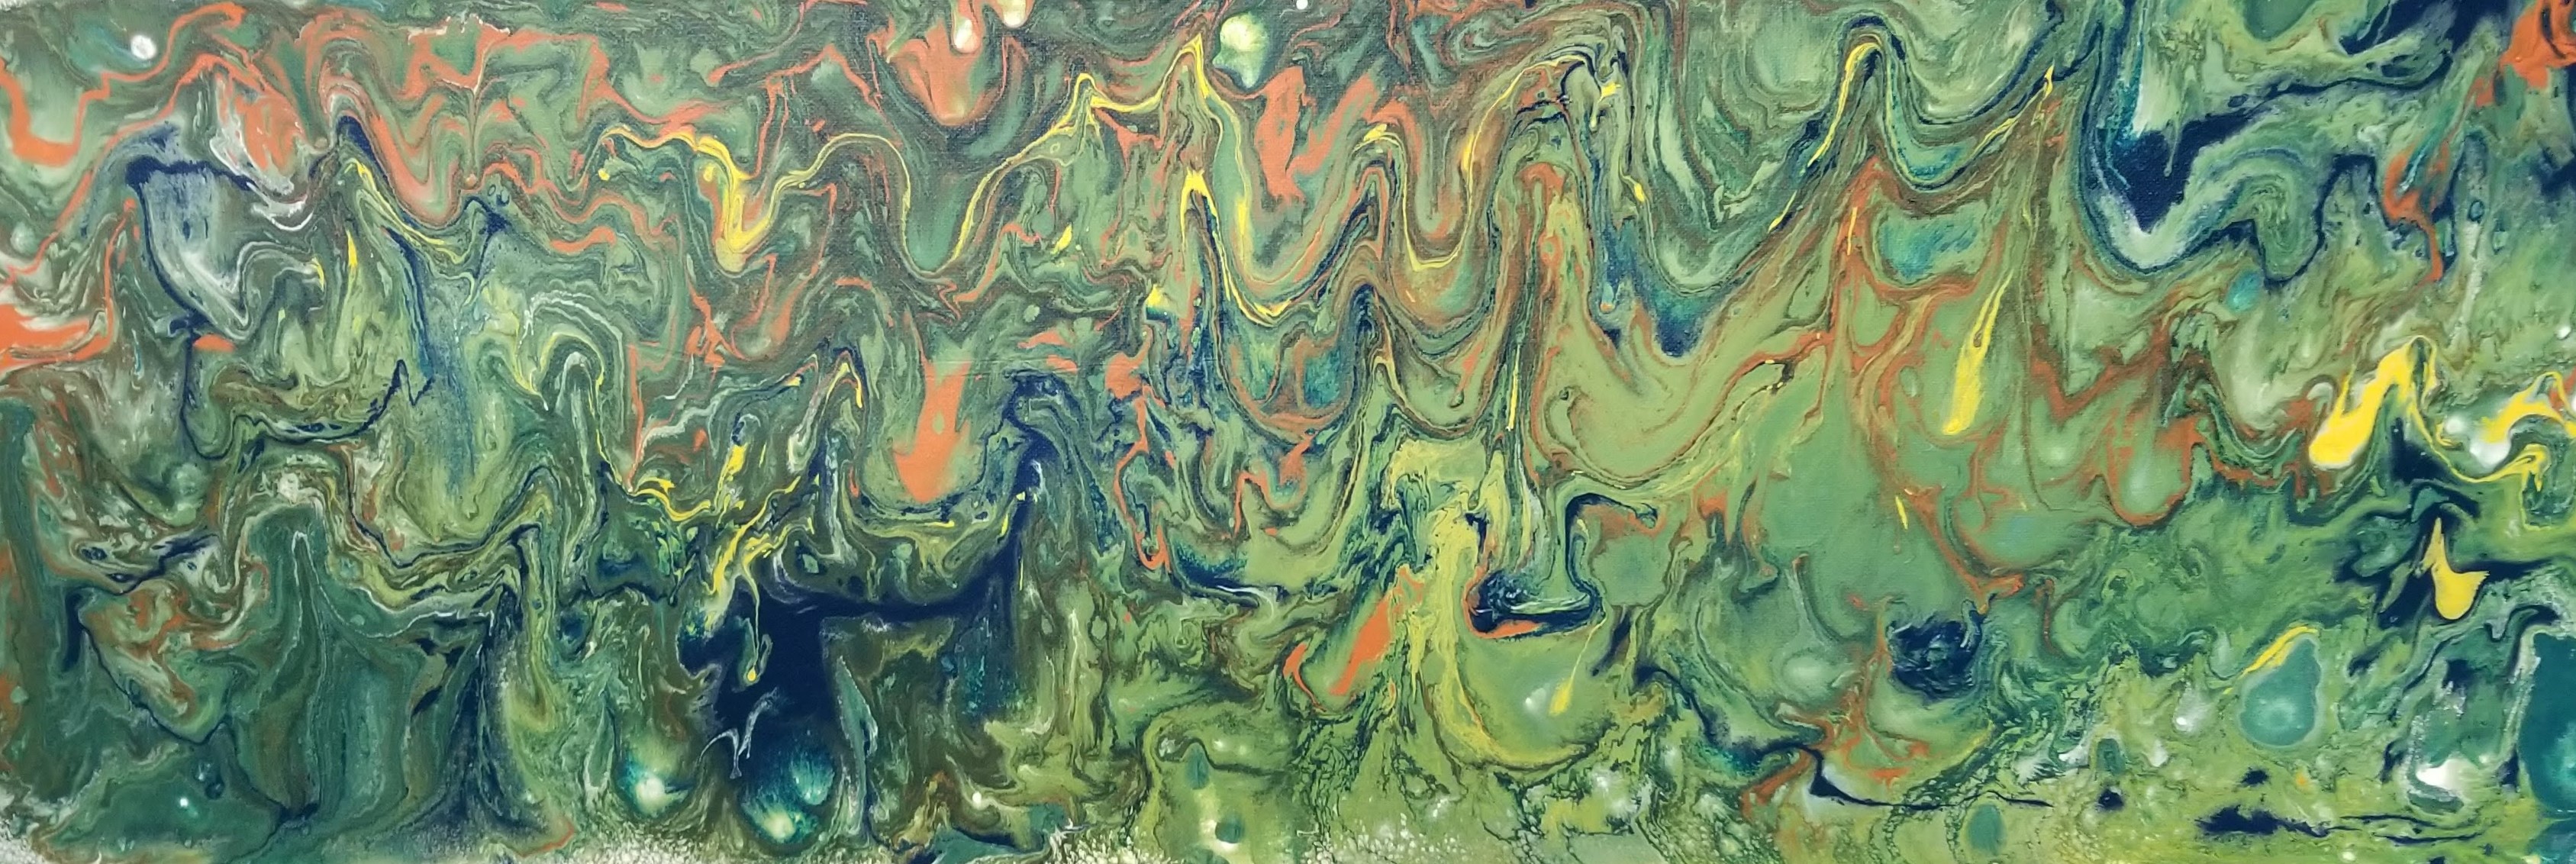 Green Water Pouring